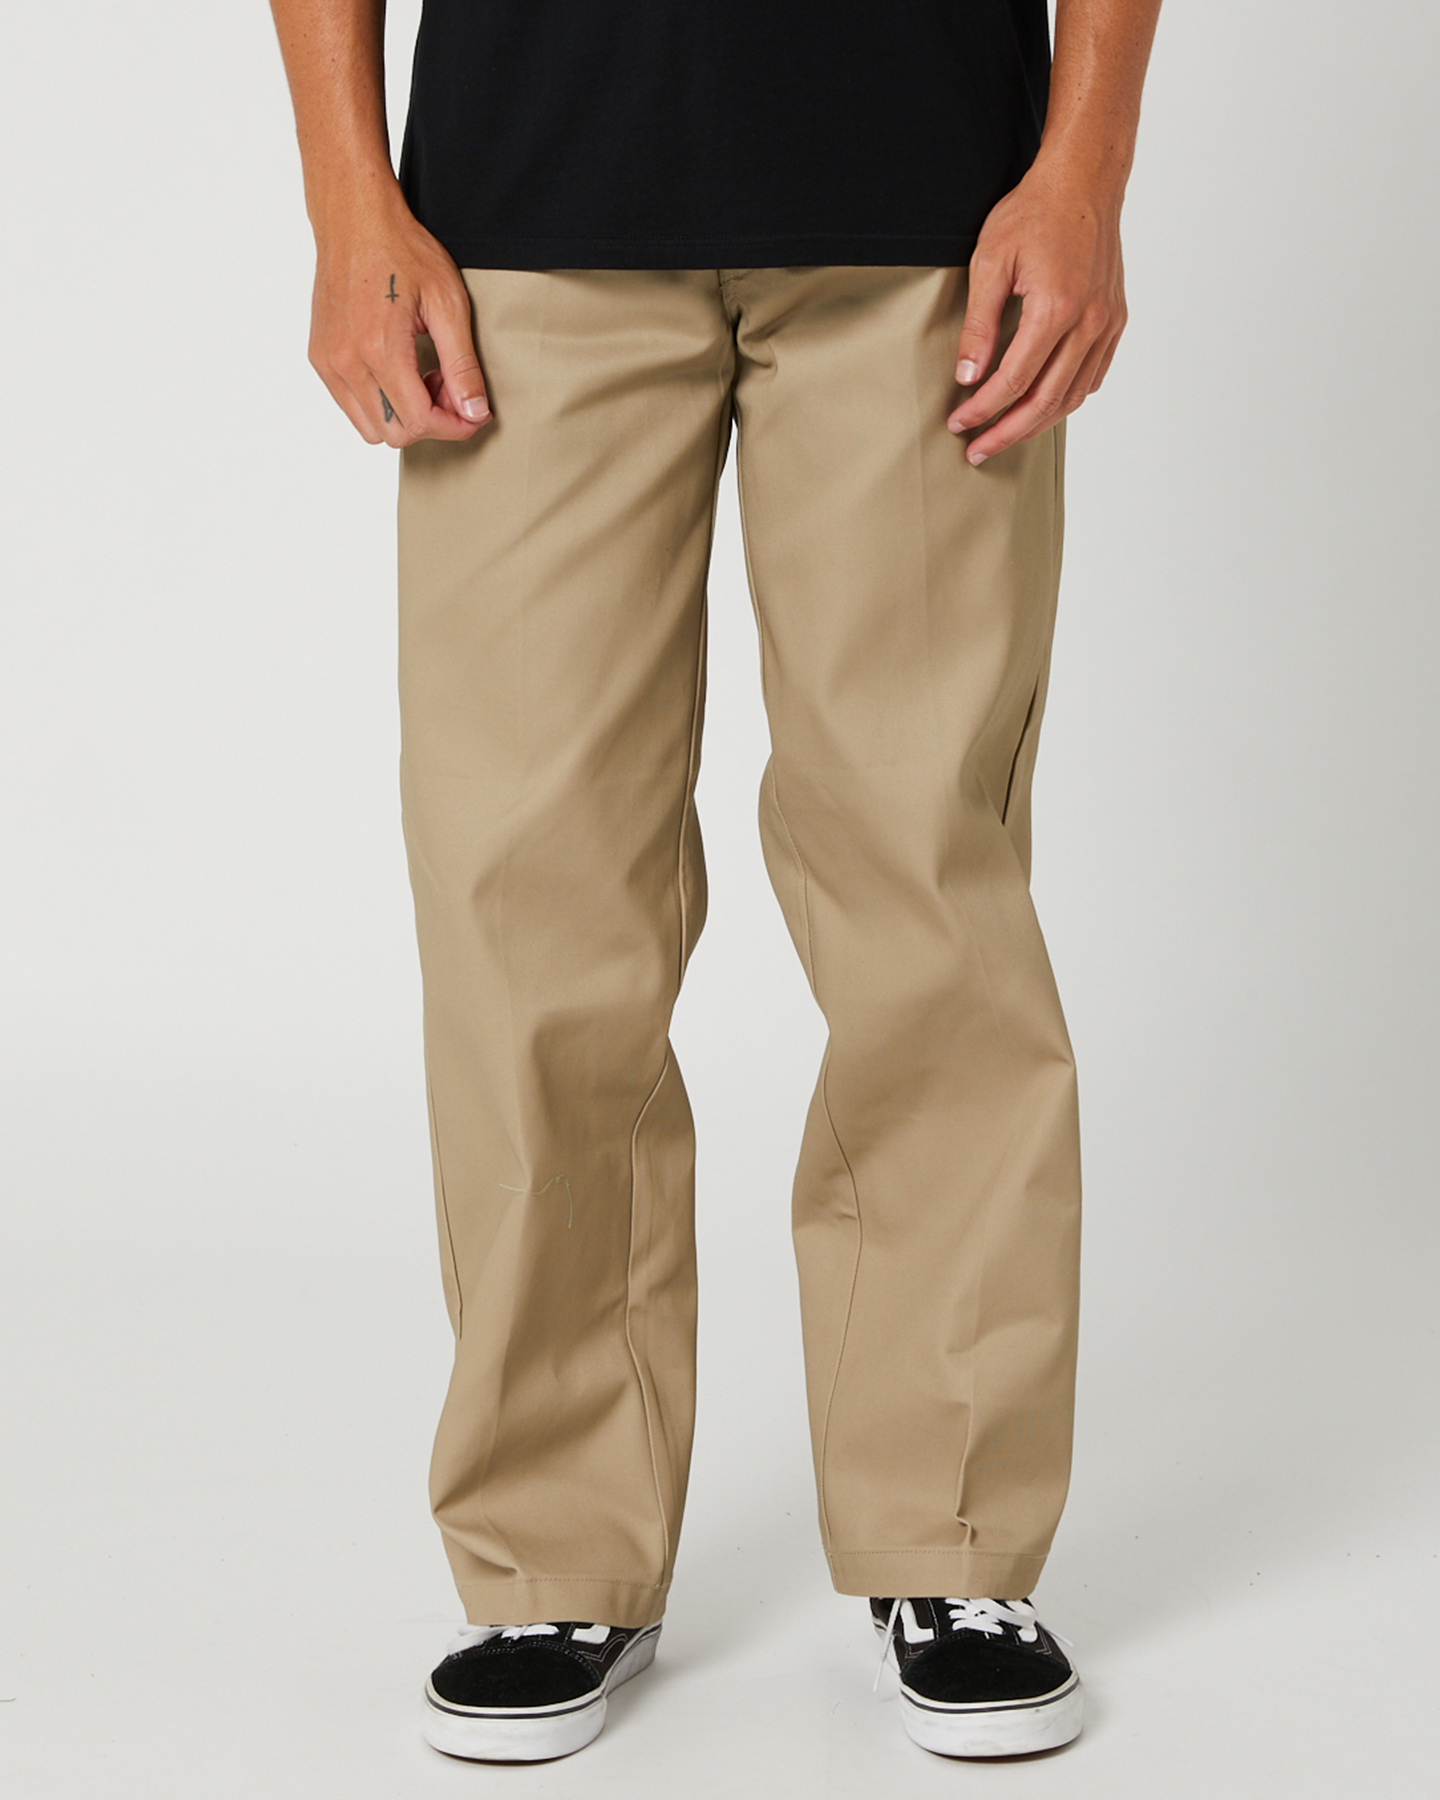 Dickies Super Baggy Loose Fit Pant - Khaki | SurfStitch